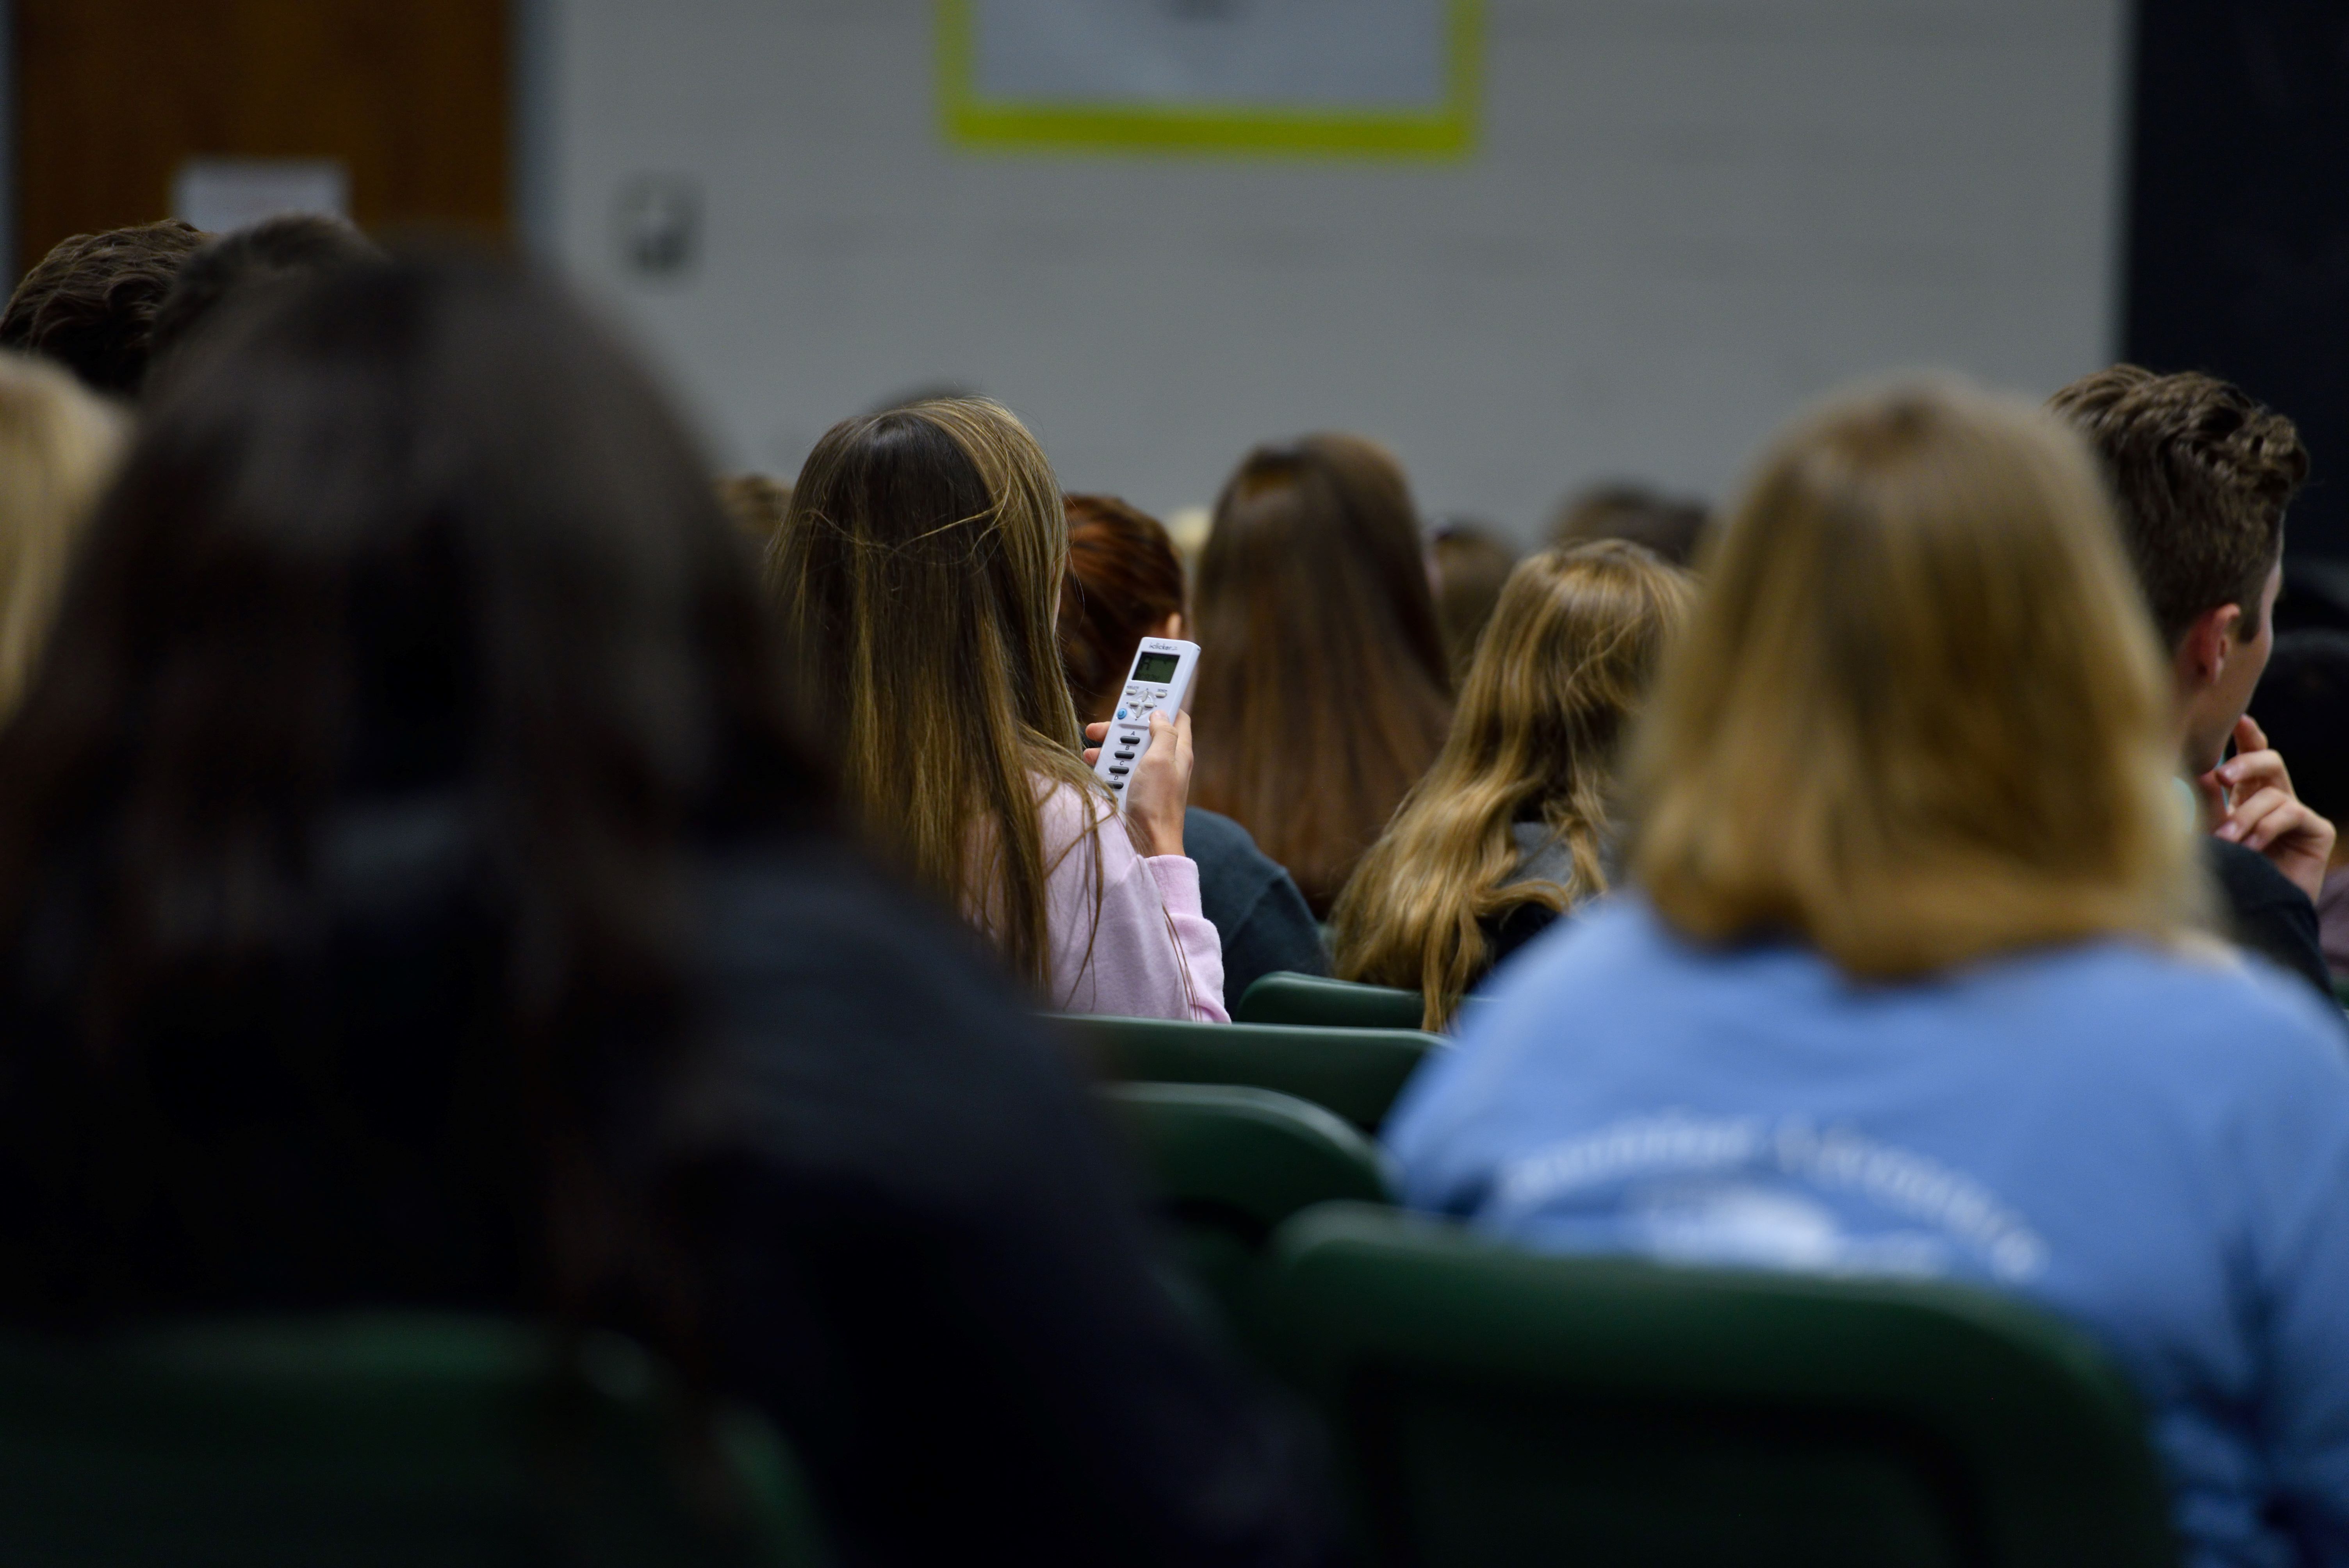 An MSU undergraduate answers a question in a campus lecture hall. Credit: Harley Seeley.